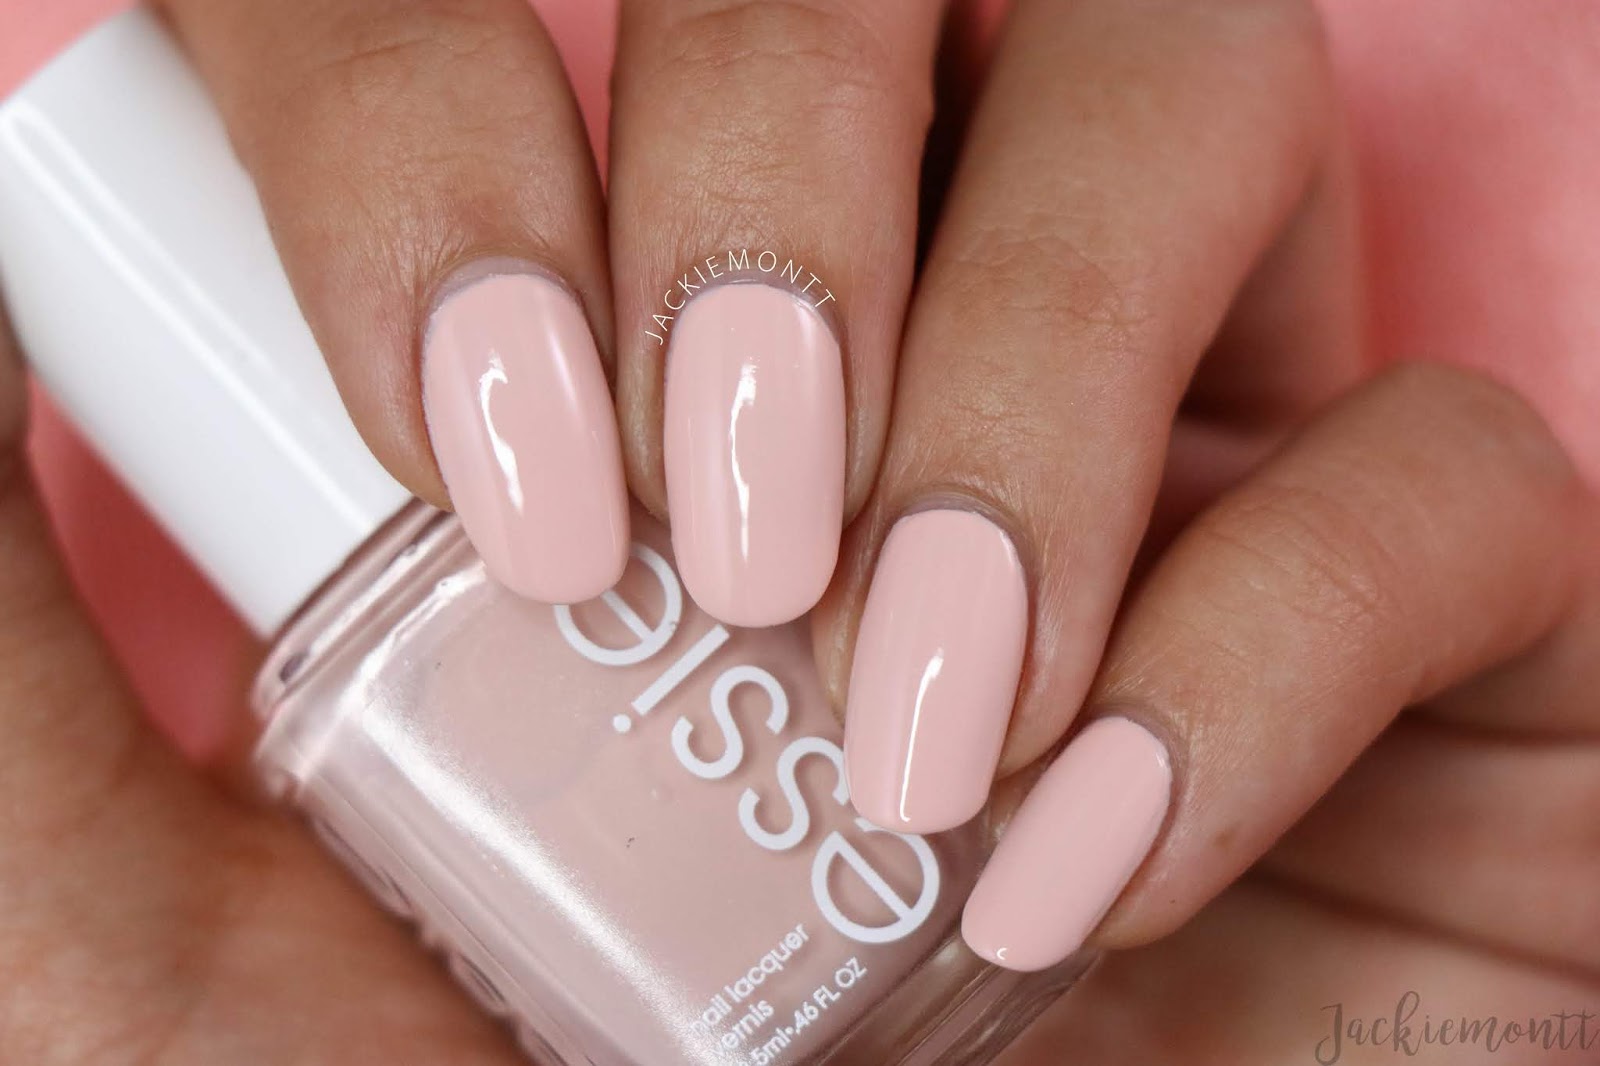 6. The Best Essie Nail Polish Colors for Spring - wide 2